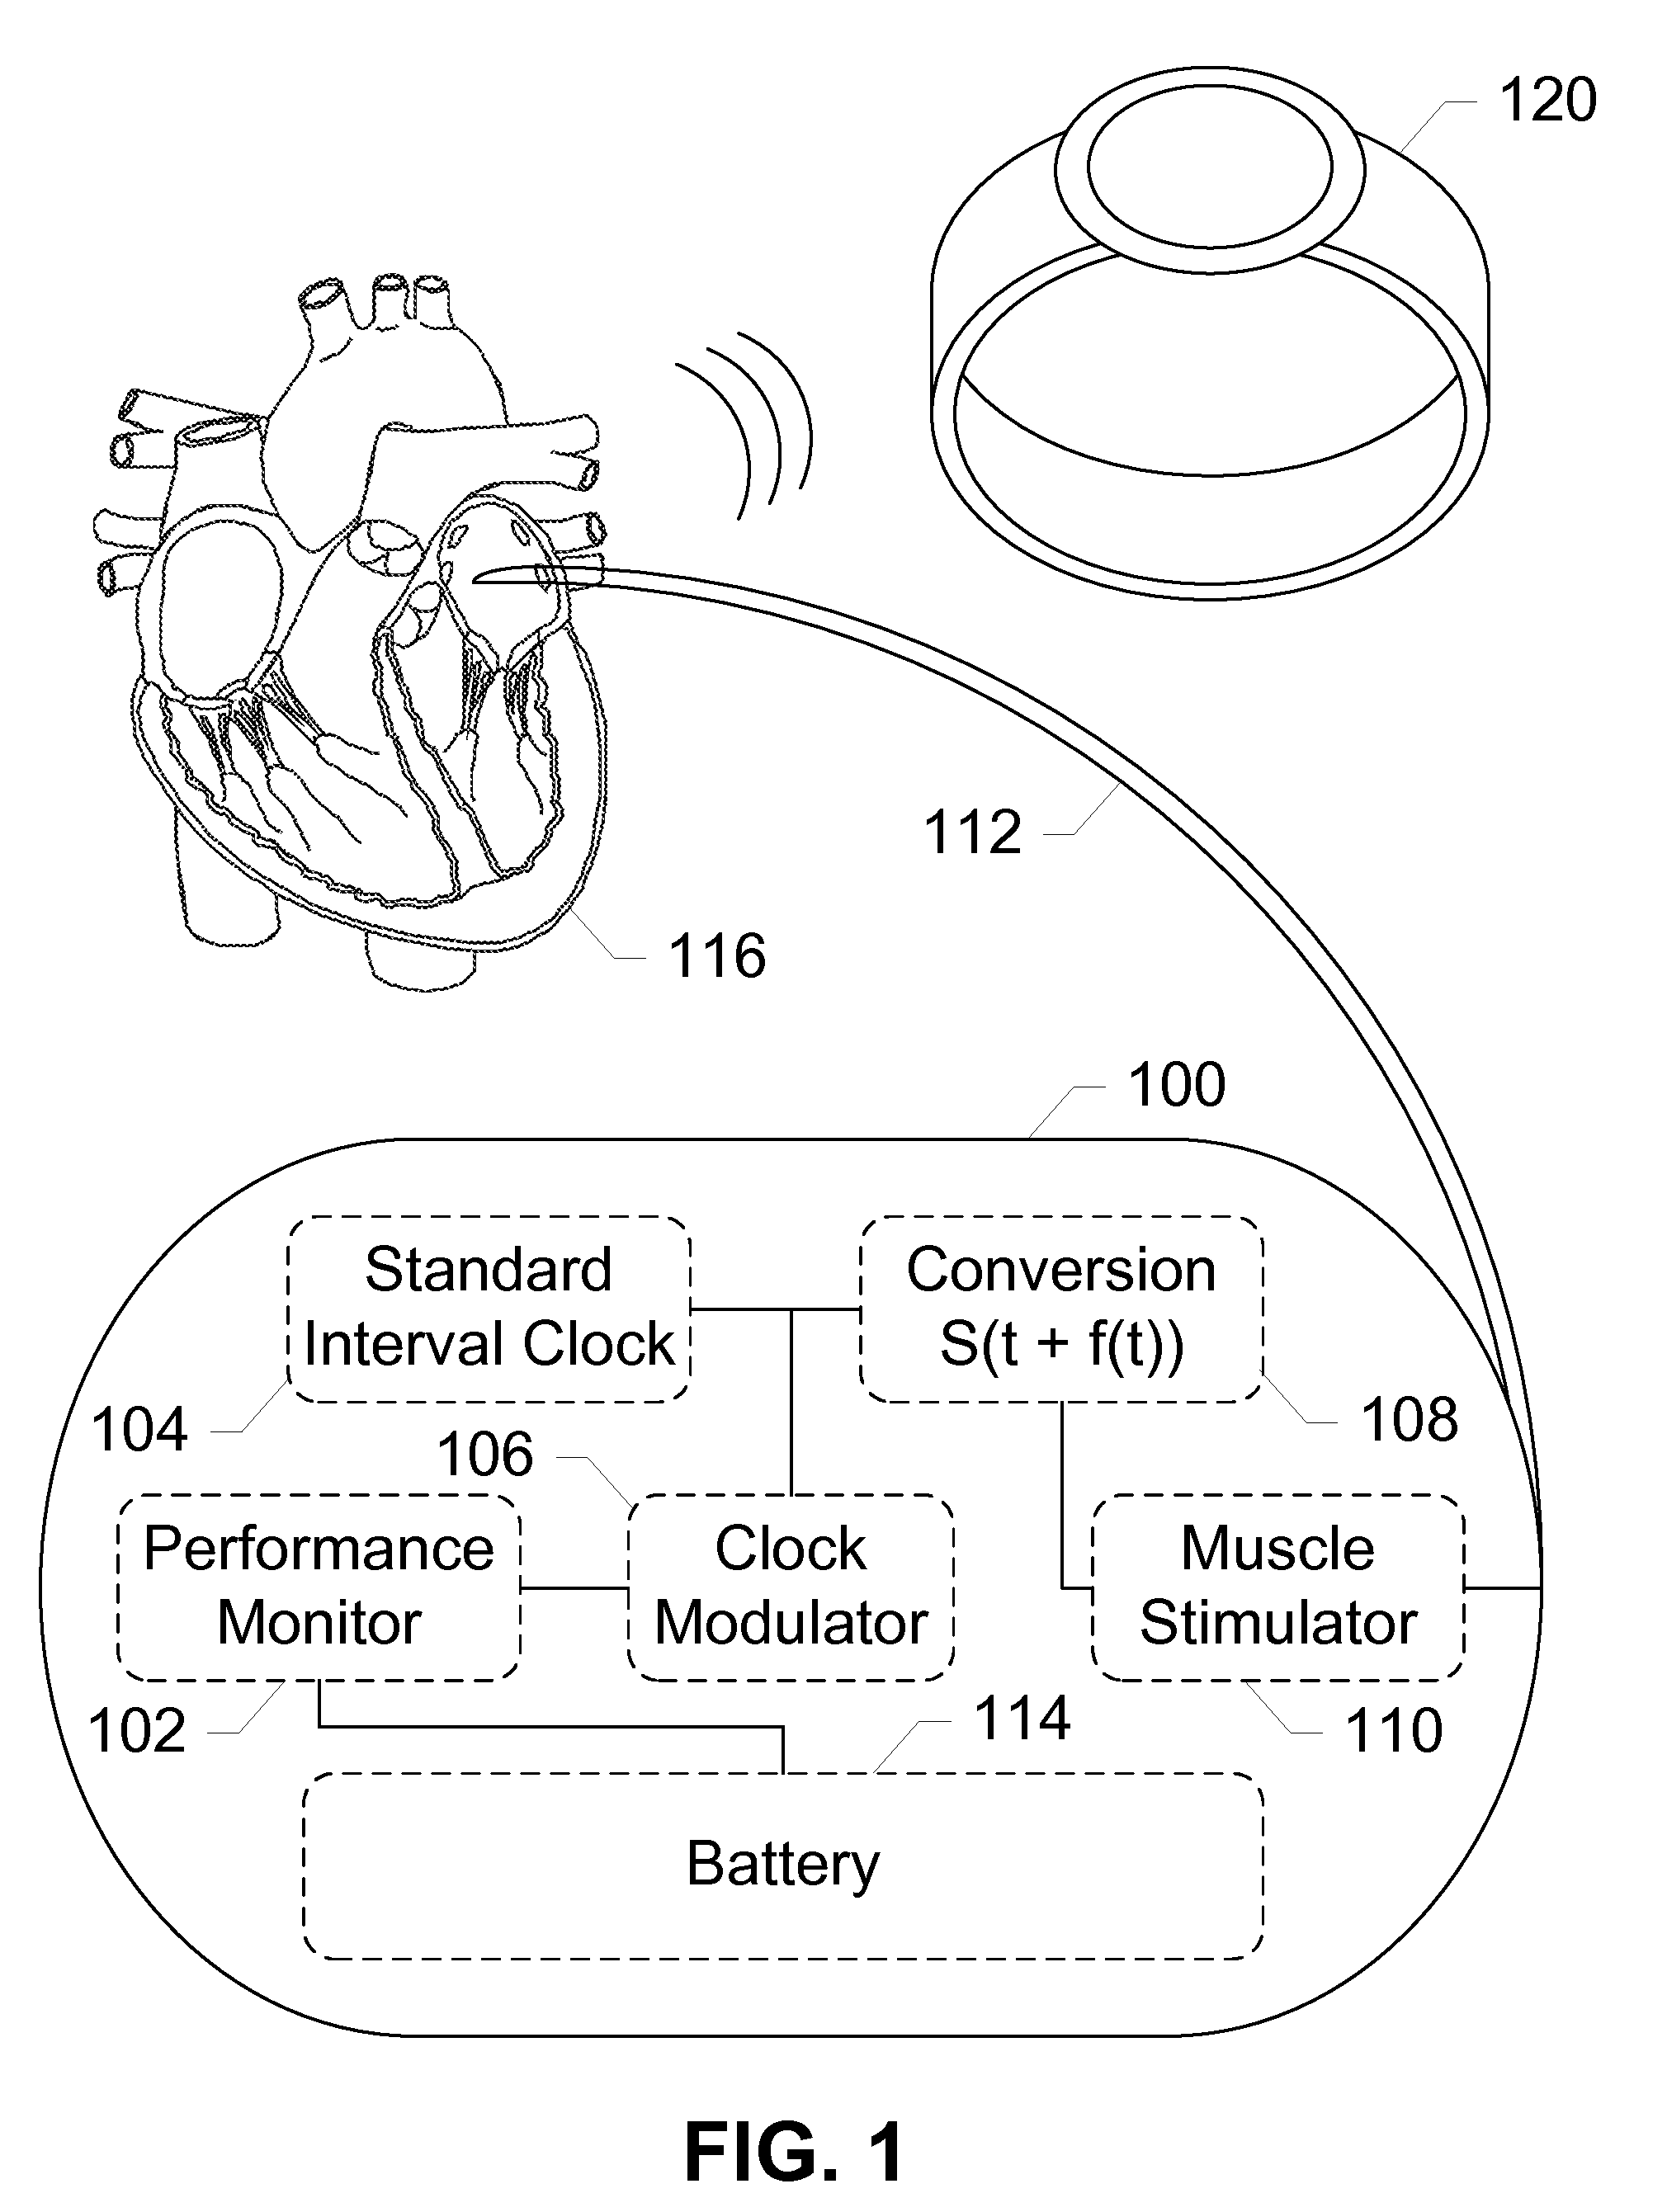 Mobile Applications and Methods for Conveying Performance Information of a Cardiac Pacemaker